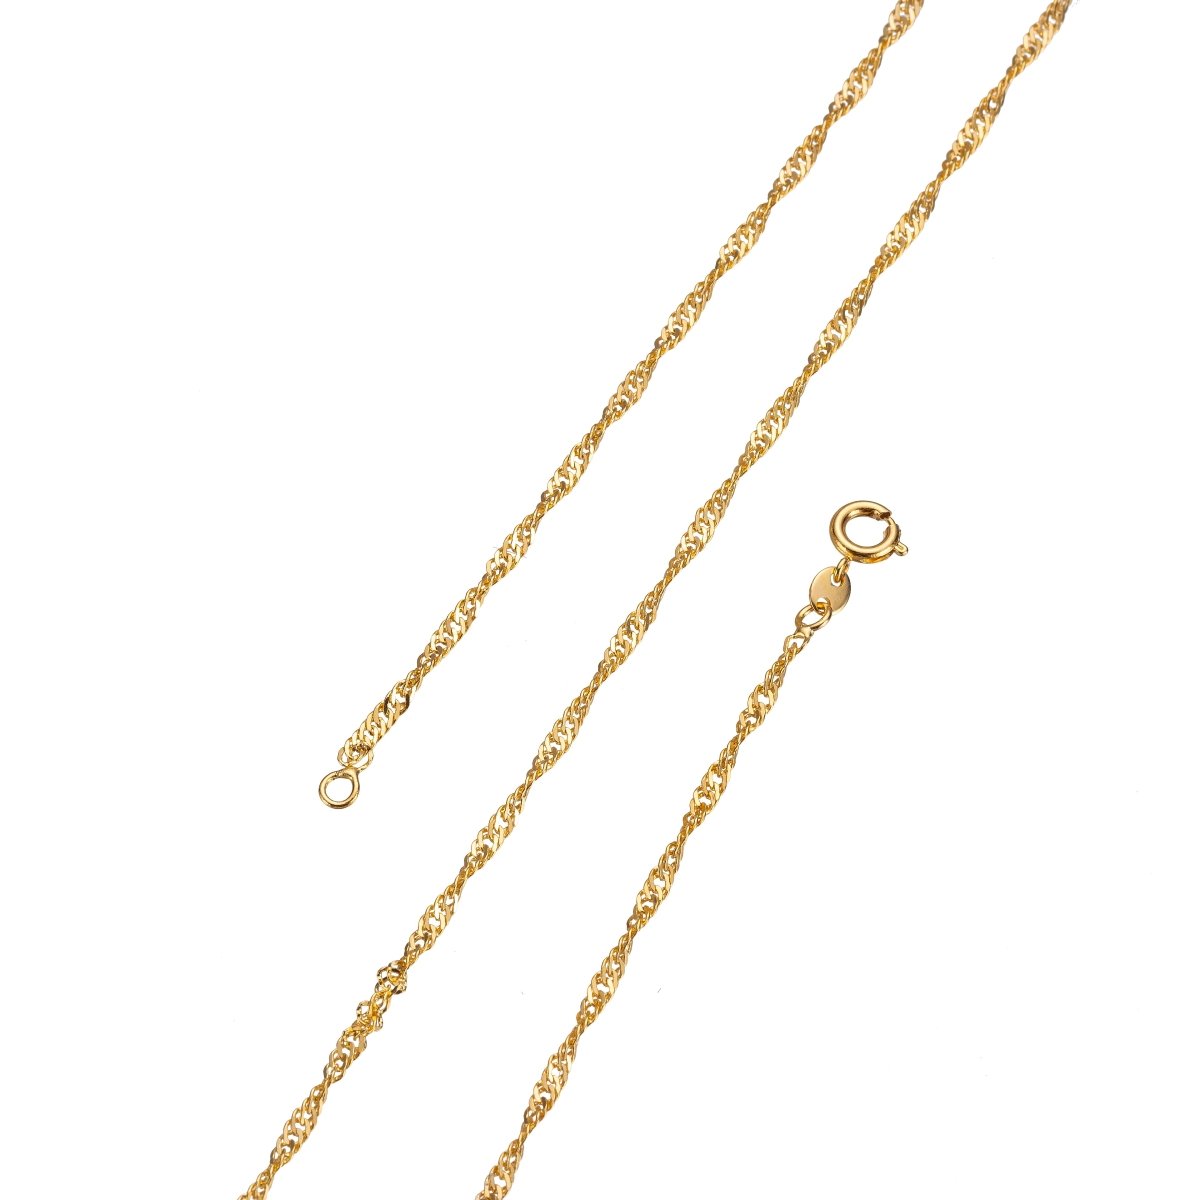 24K Gold Filled Necklace, 20.5 inch Layering Gold Singapore Chain Necklace, Dainty 1mm Singapore Necklace w/ Spring Ring | CN-253 - DLUXCA